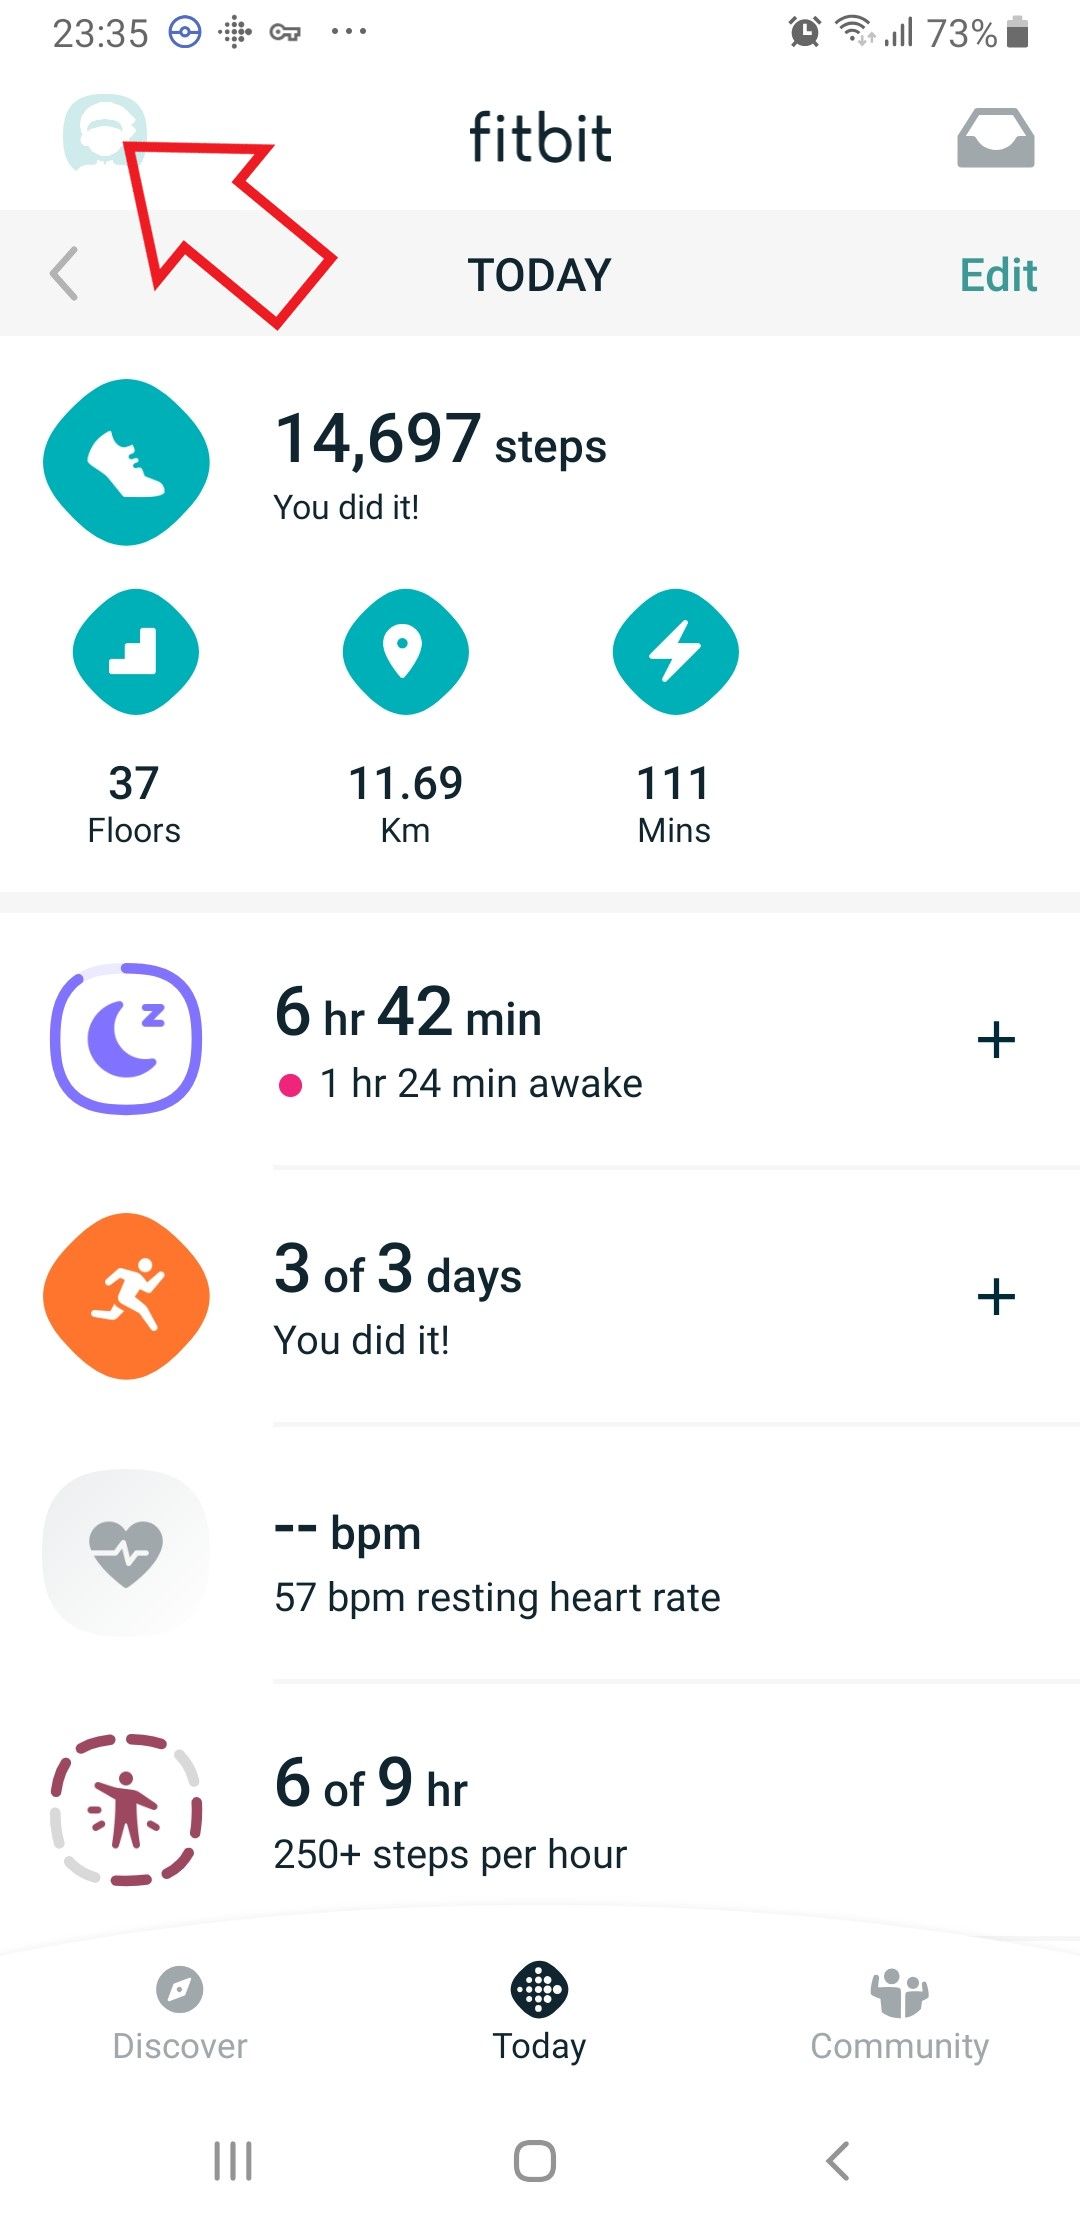 setting alarm on fitbit charge 2